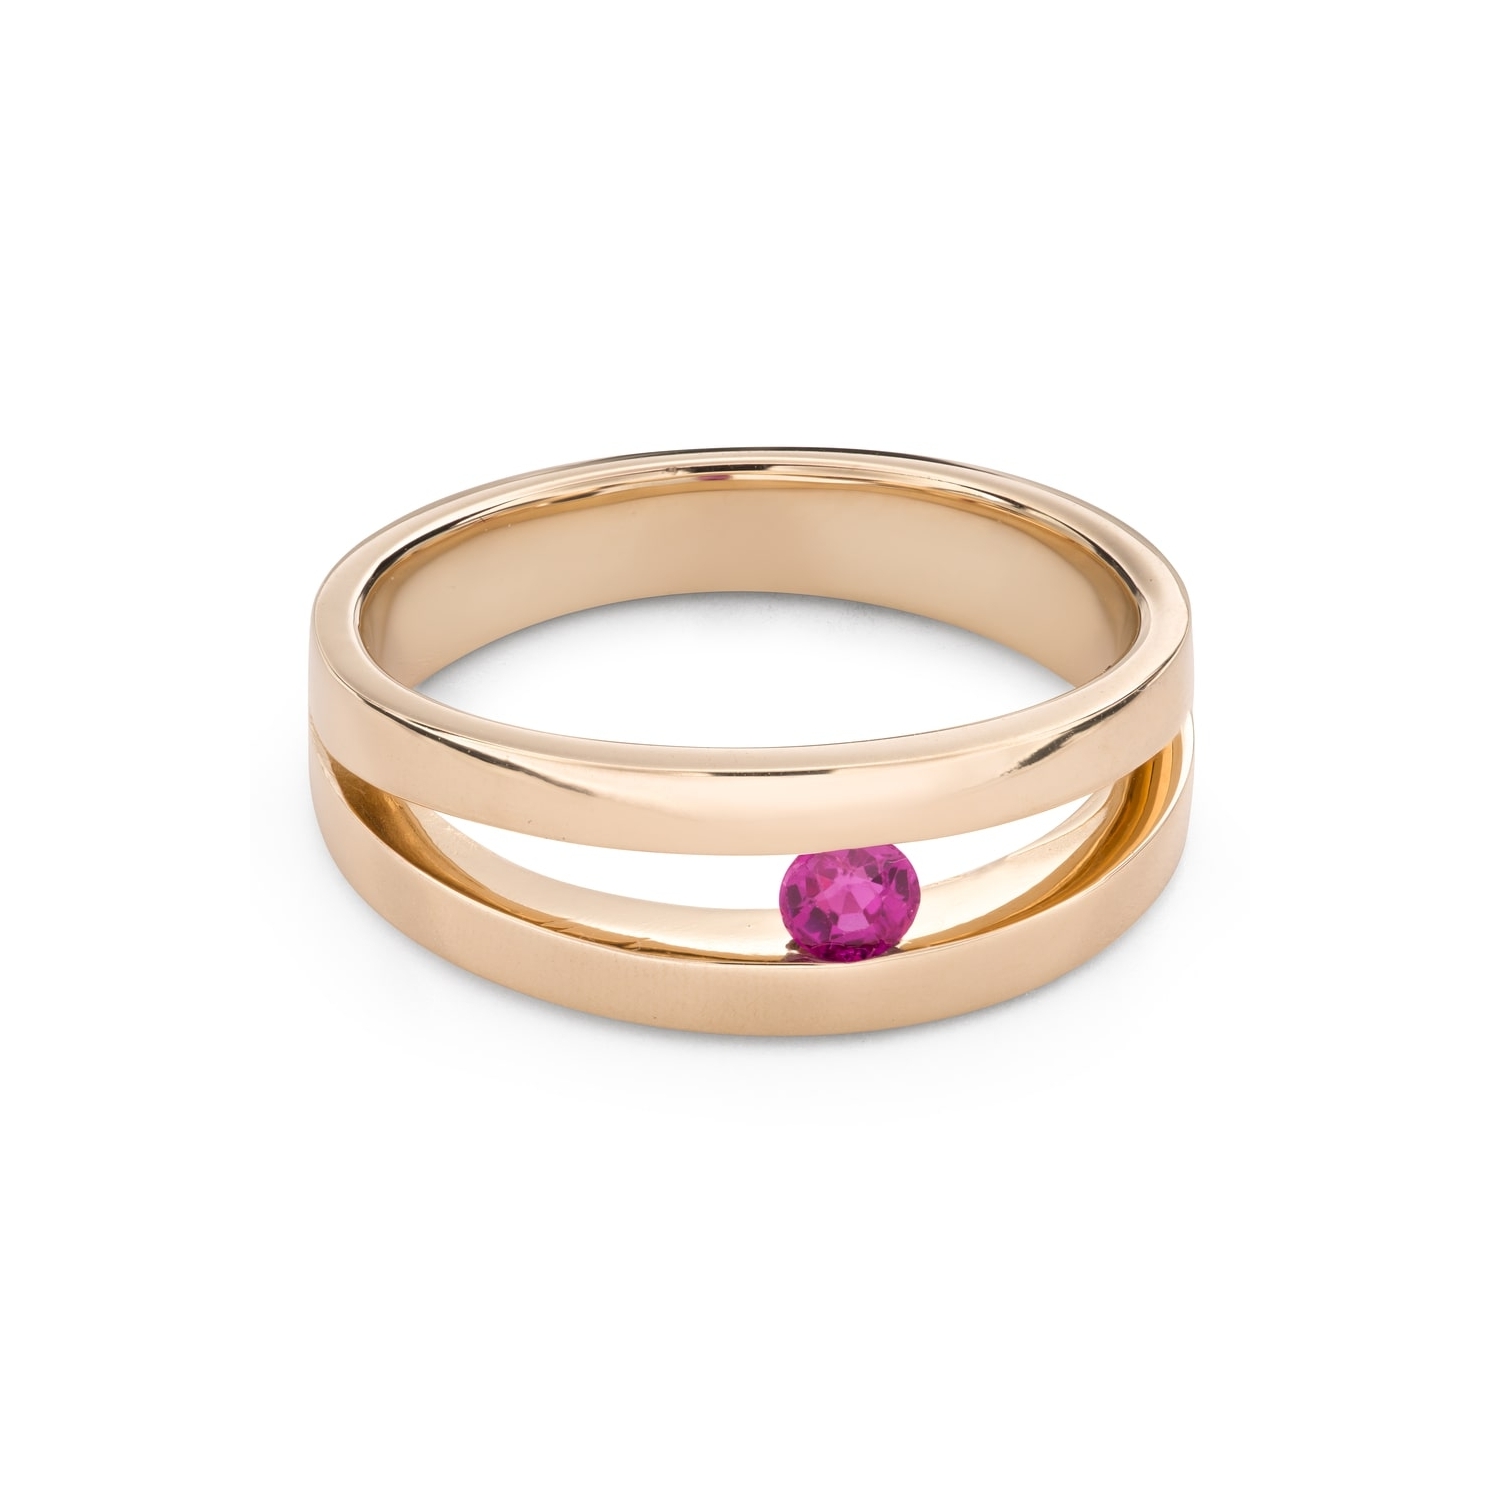 Gold ring with gemstones "Ruby 46"